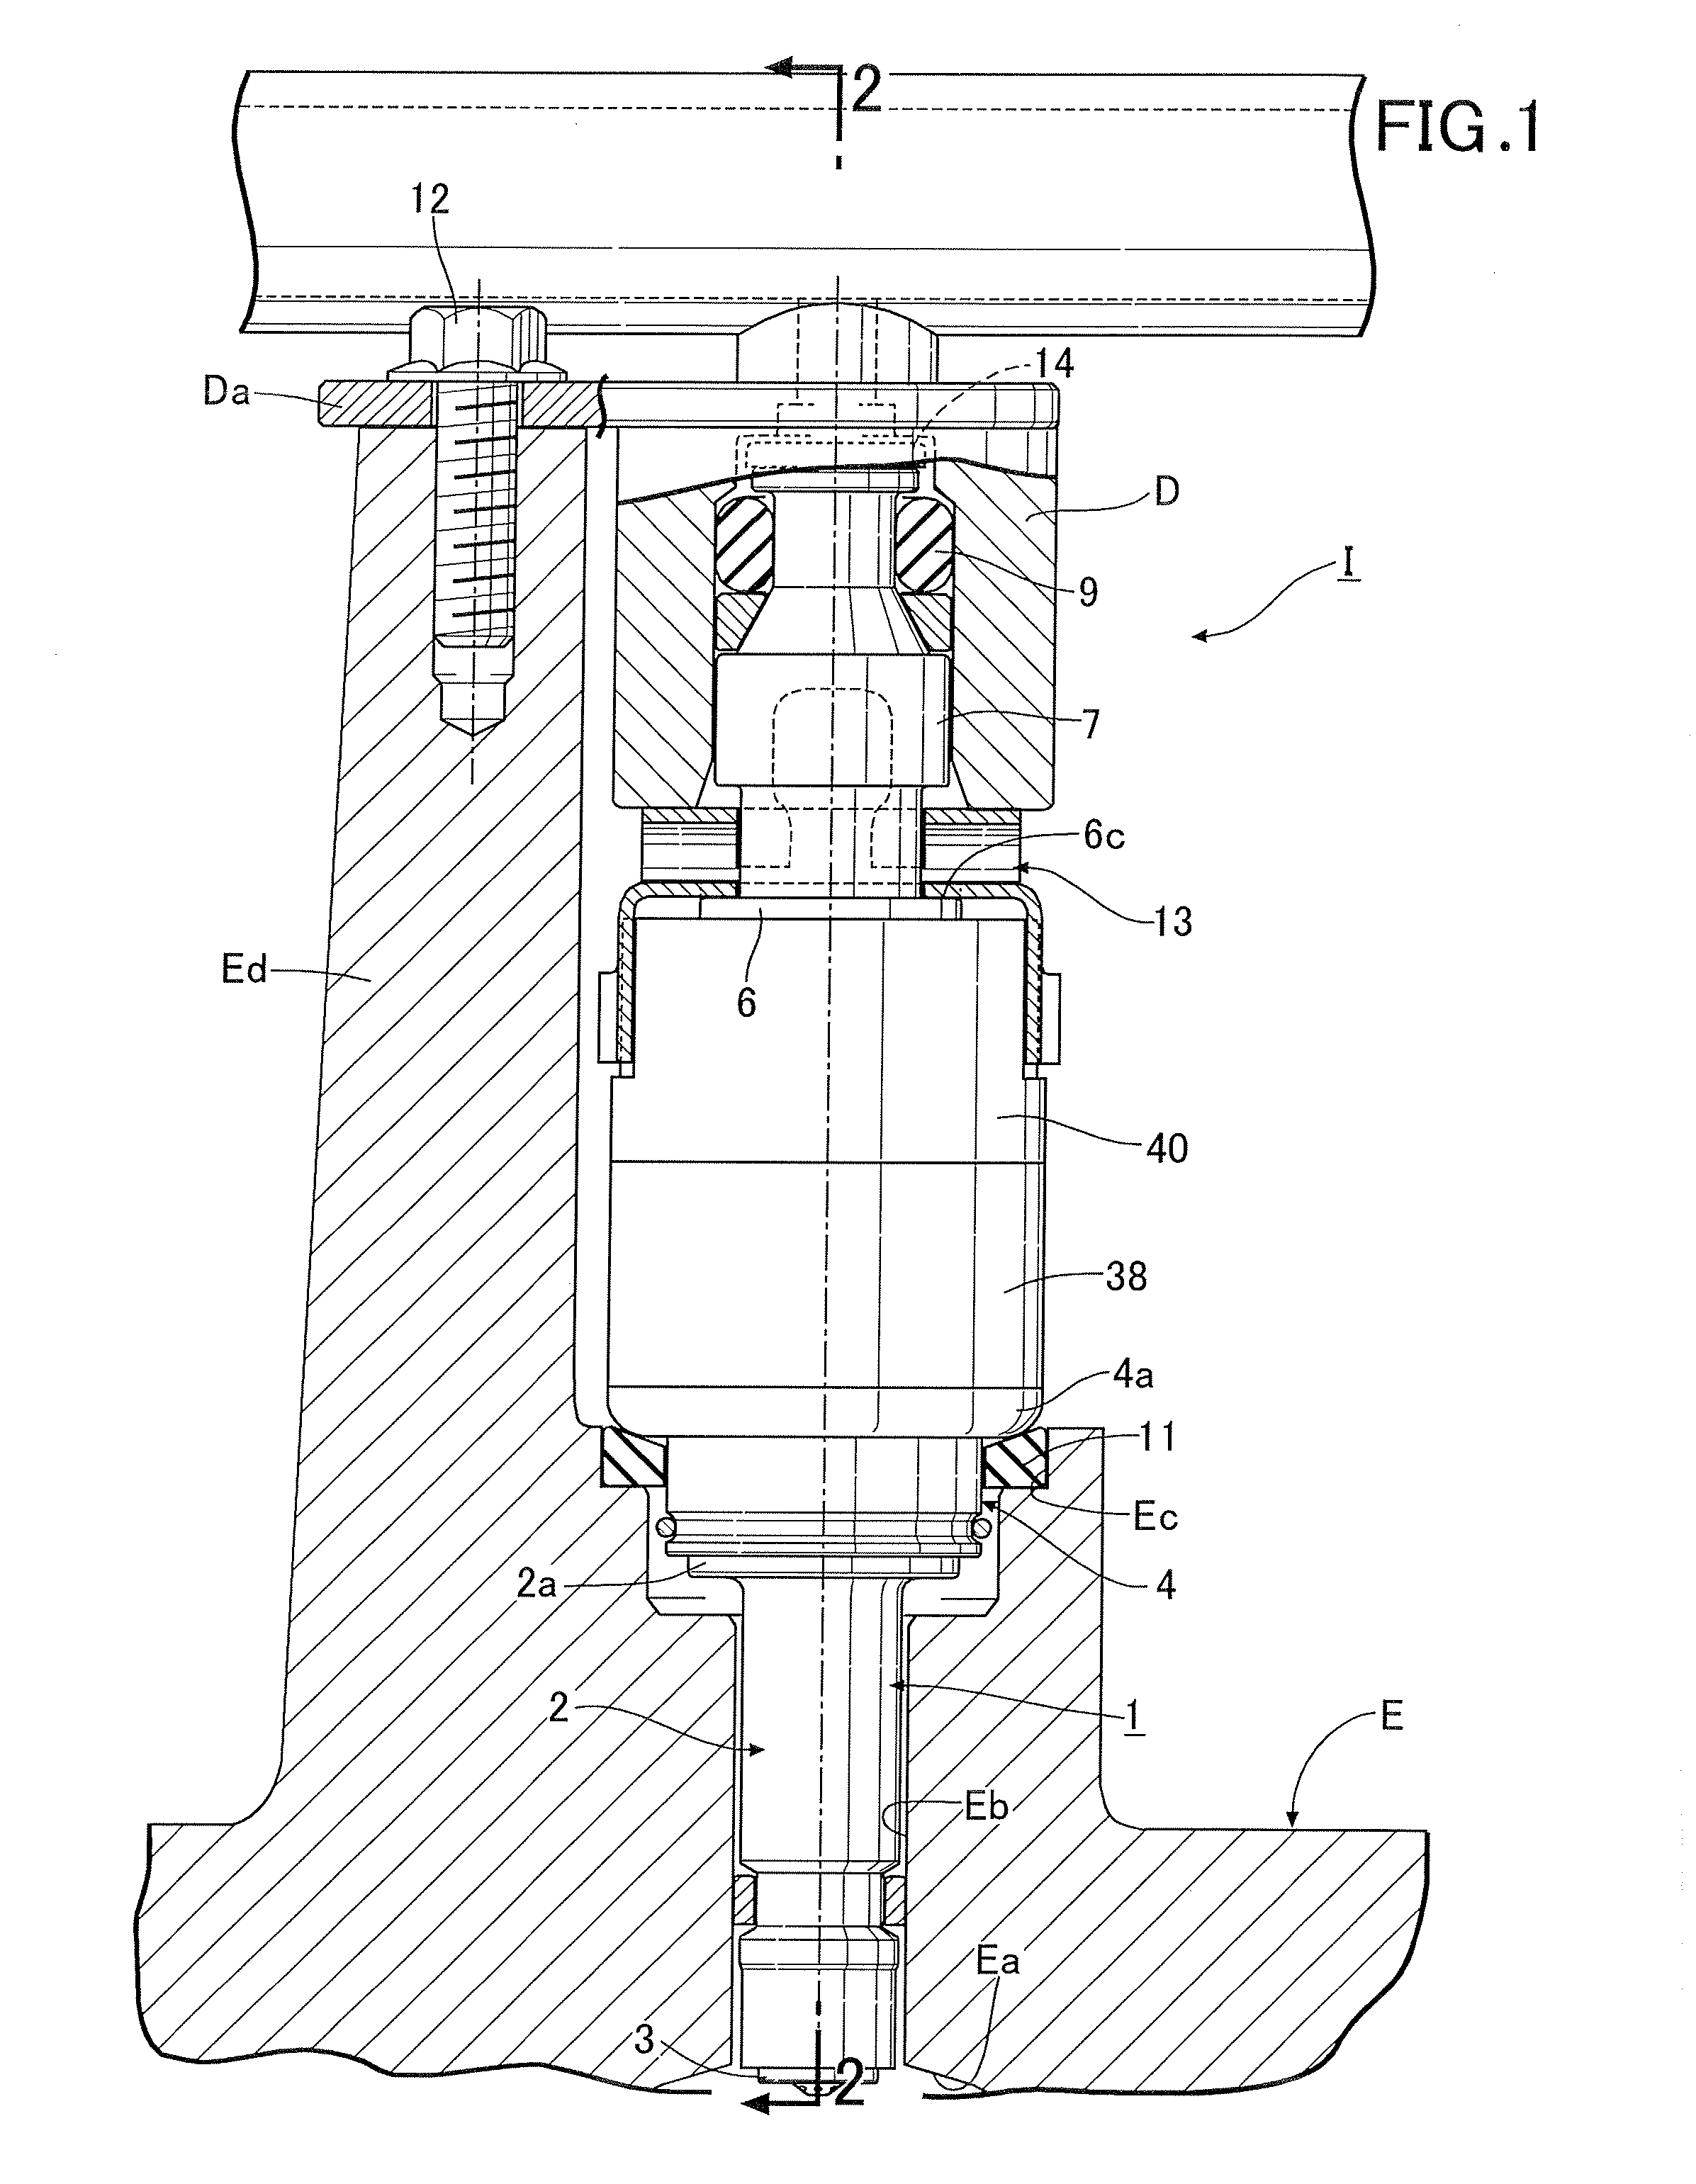 Support structure of direct fuel injection valve